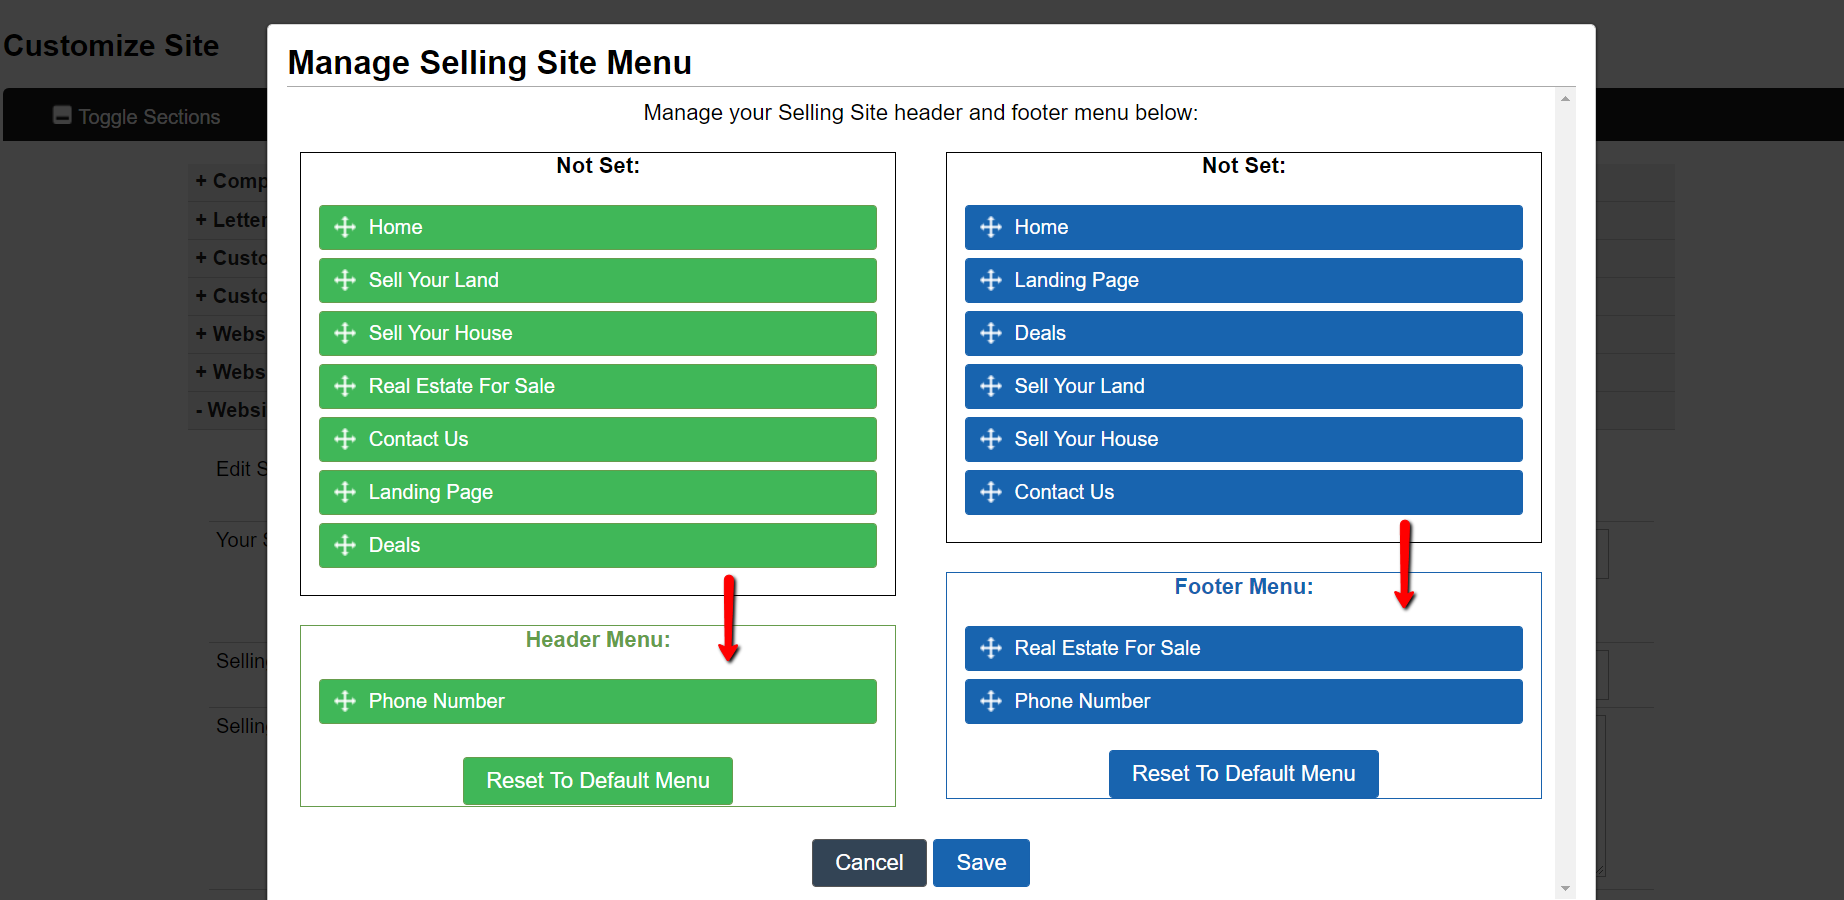 How To Customize The Selling Website Menu